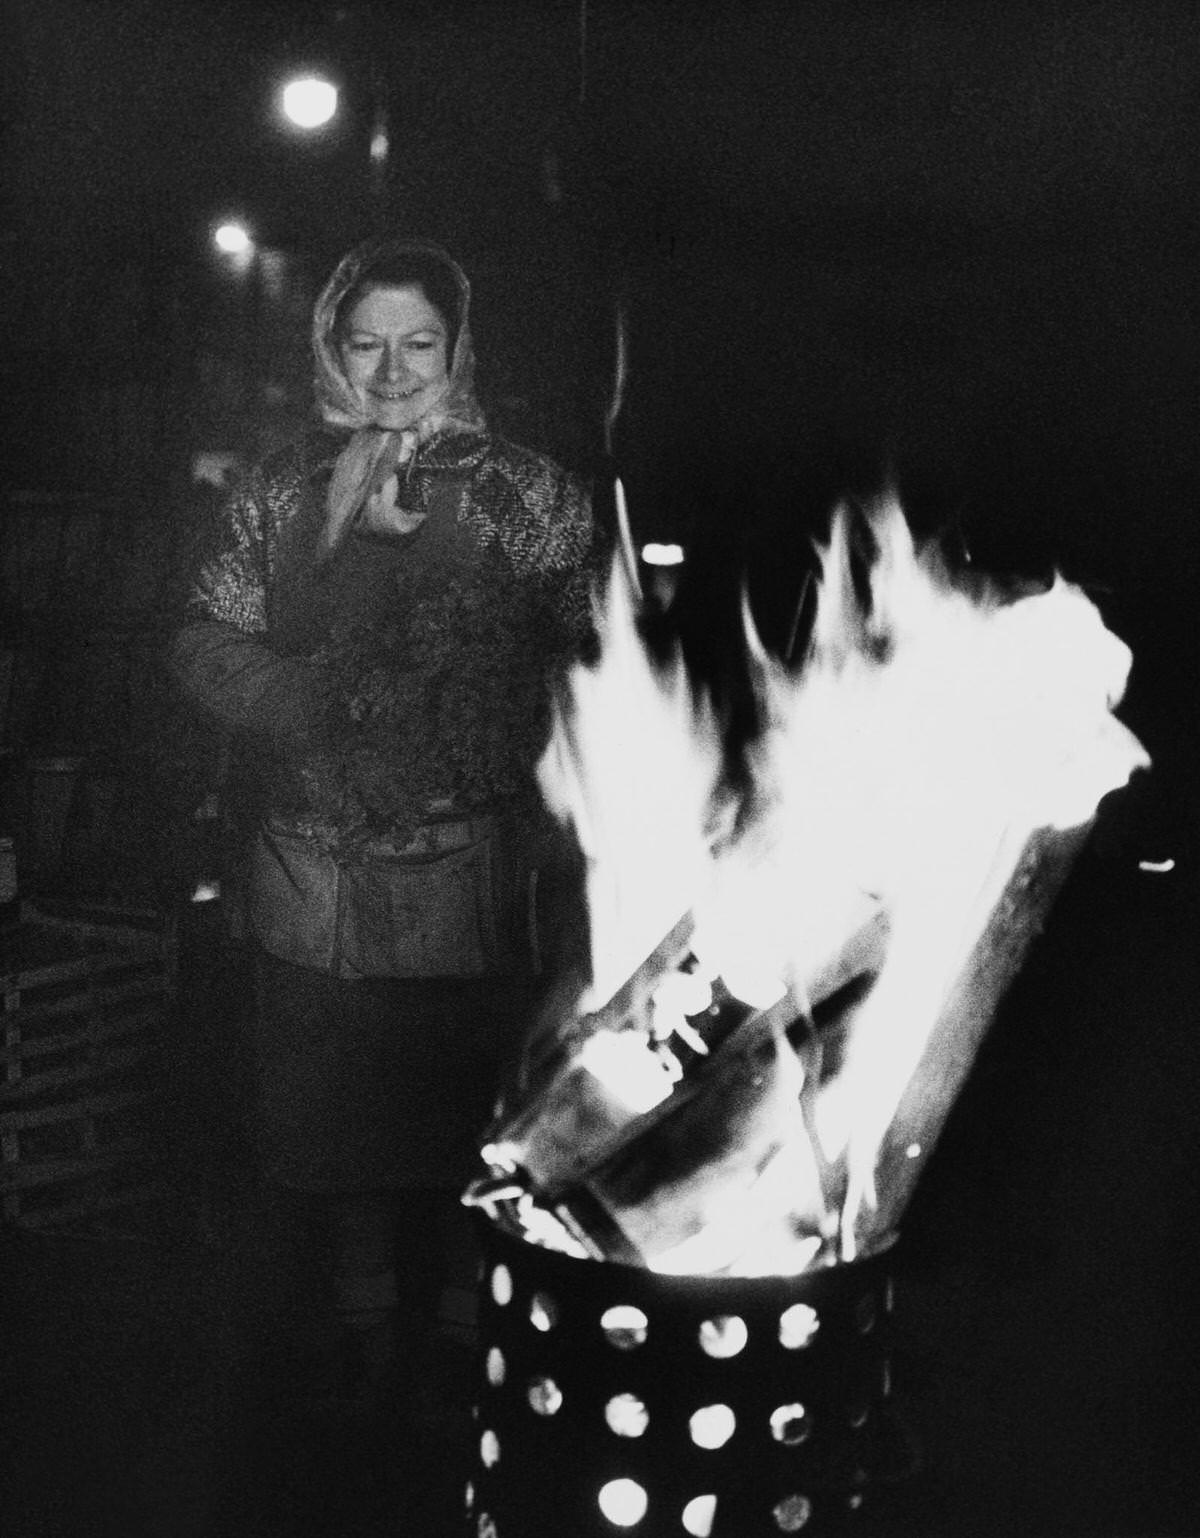 A Woman Warming up in front of a fire, Les Halles, 1960s